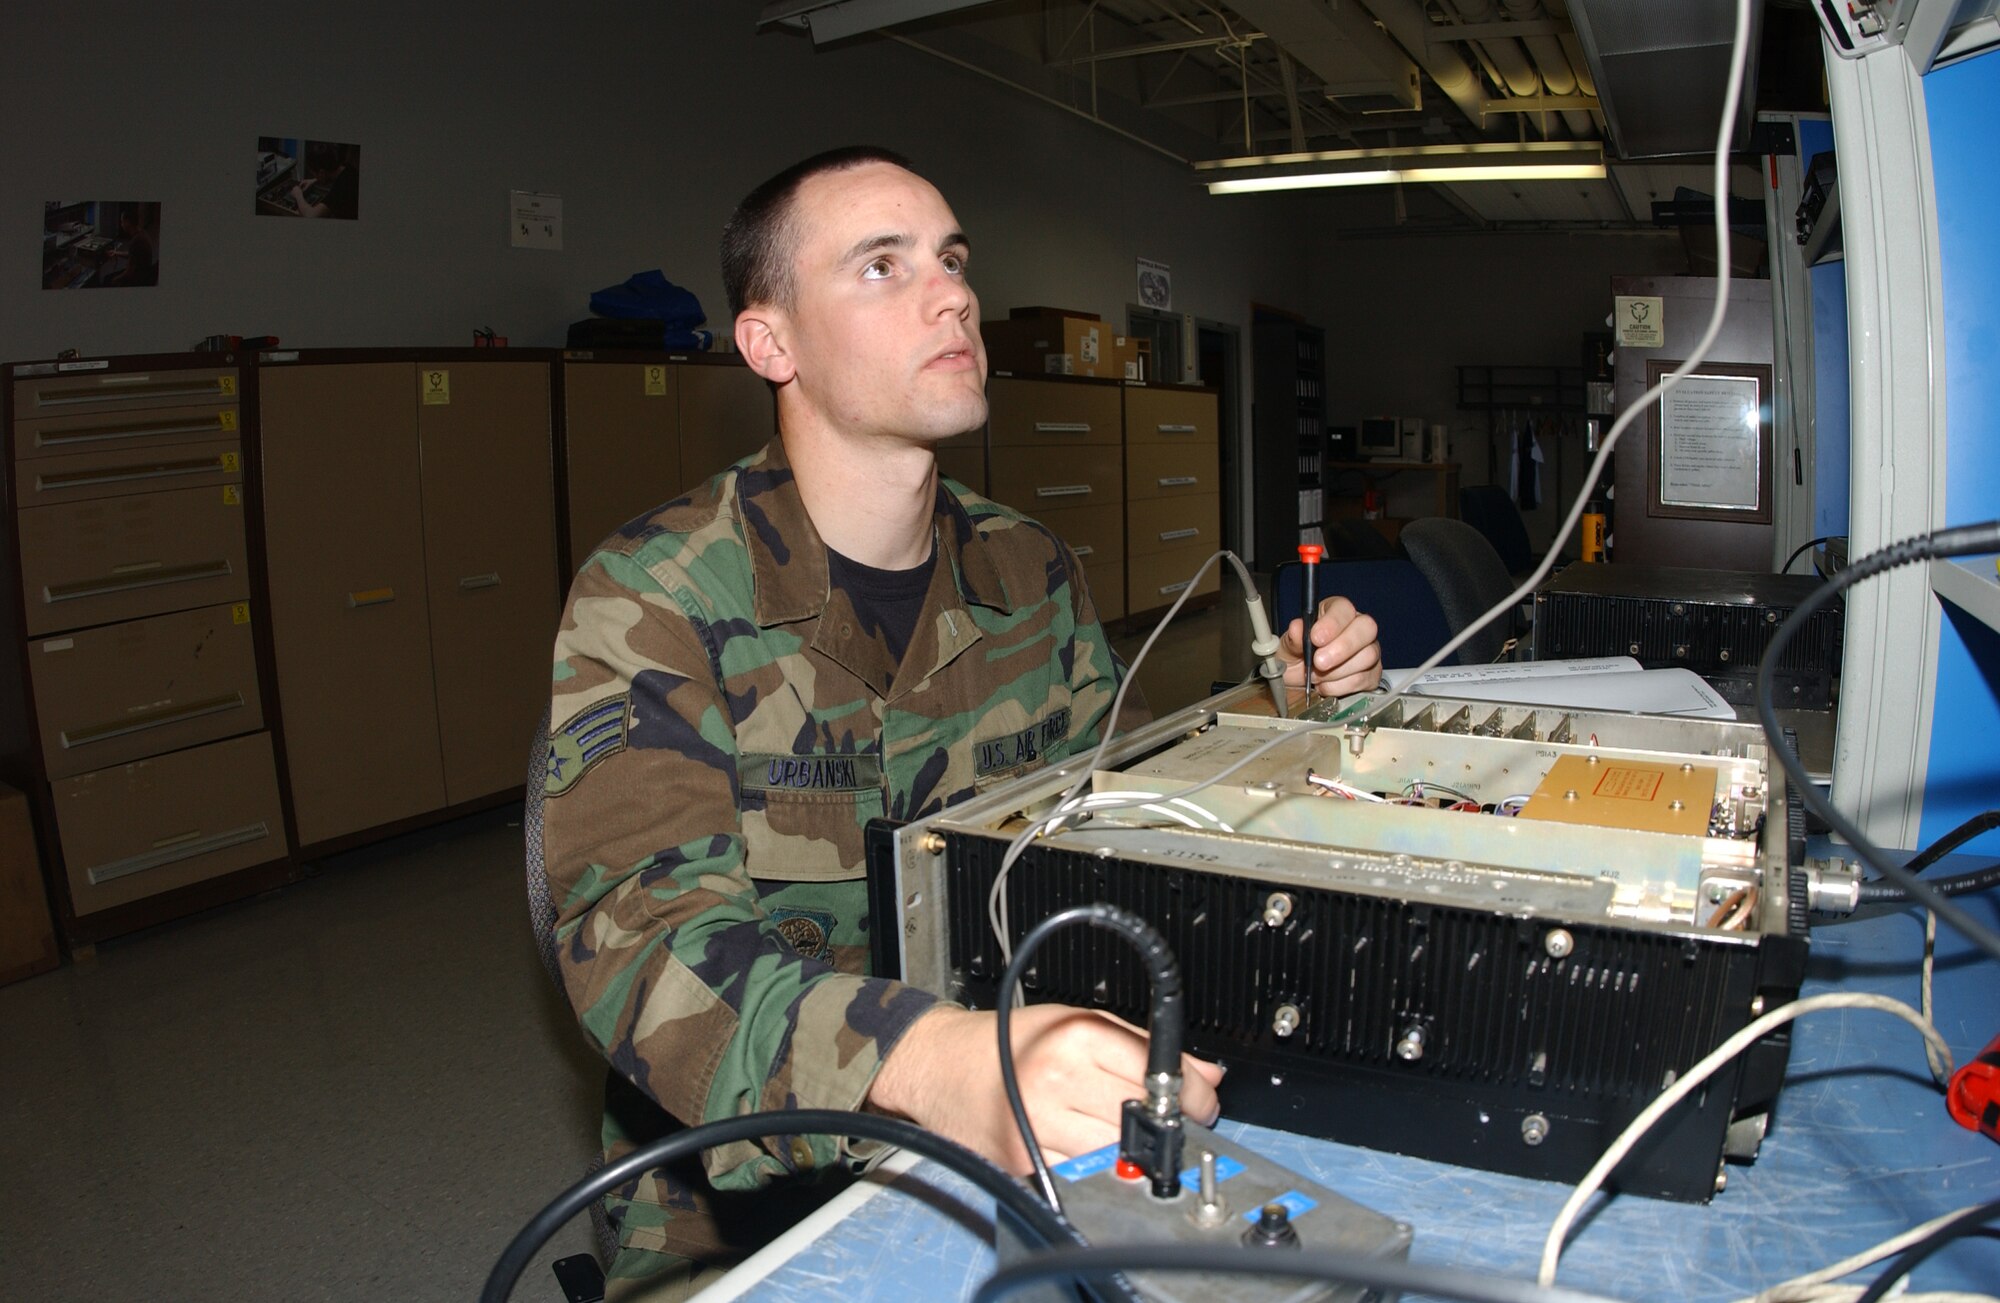 Senior Airman Daniel Urbanski, 319th Communications Squadron was recognized as a member of the award-winning RIPRNET team he was on during a deployment to Iraq from September 2005 to January 2006. He is currently back in the 319 CS working on airfield communications. (Photo by Airman 1st Class Ashley Coomes) 